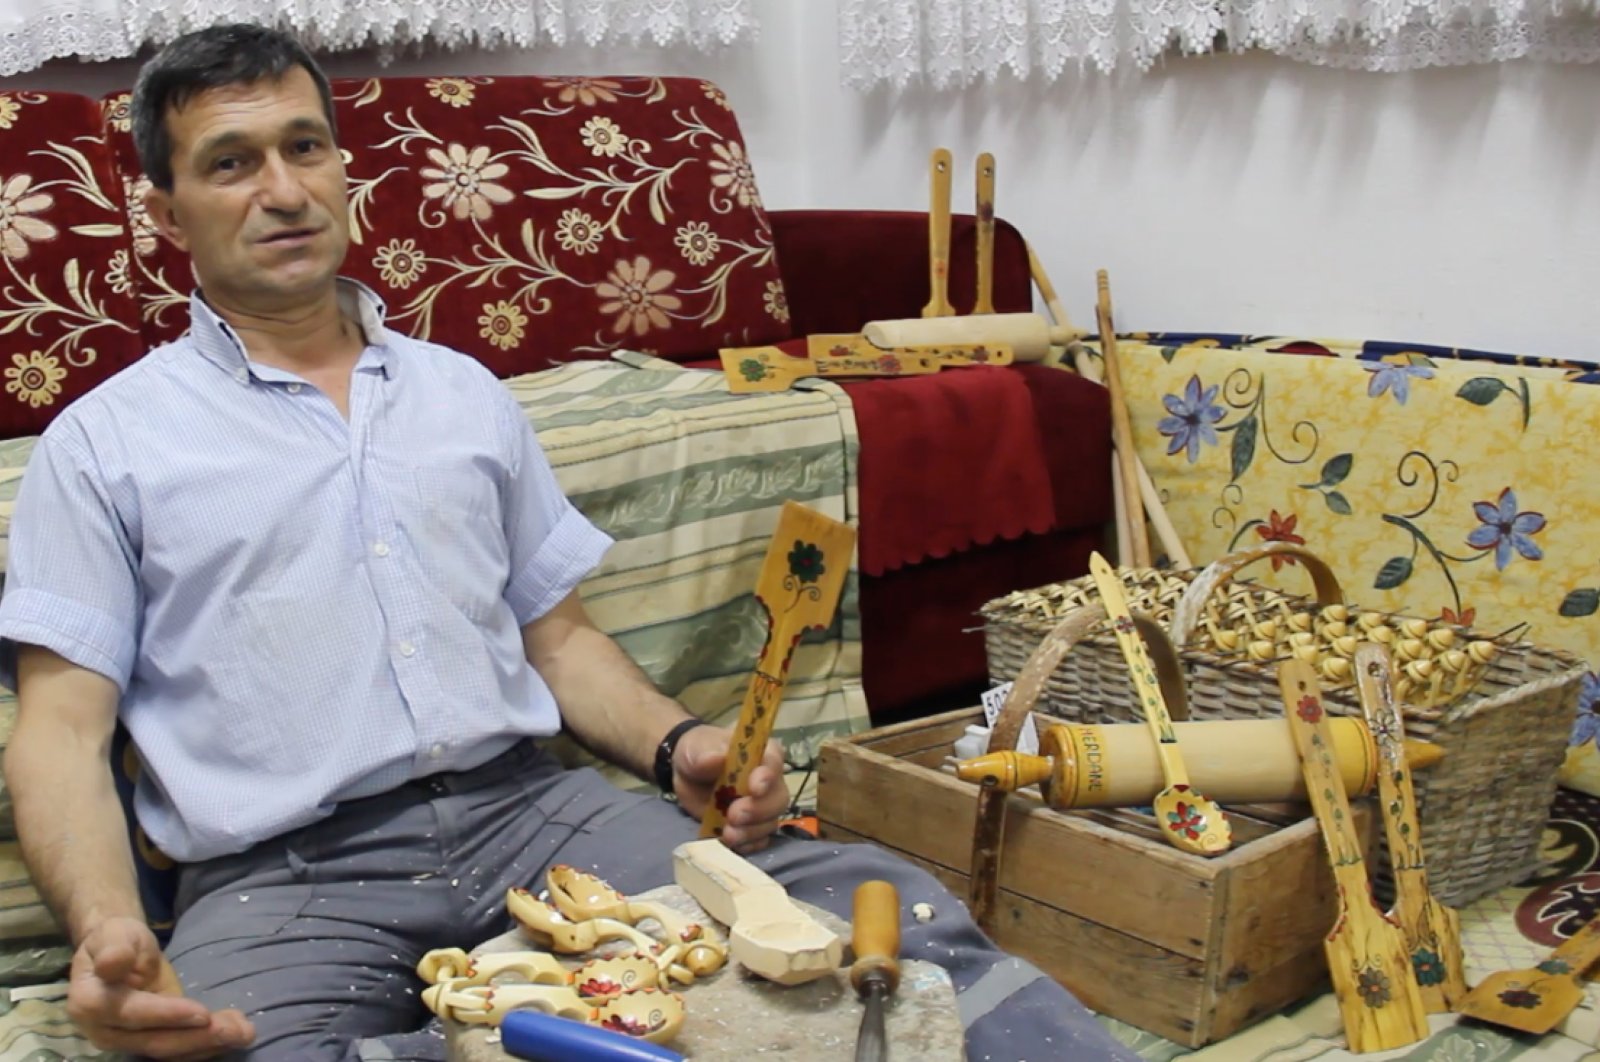 Lütfü Uğur poses with his wooden spoons, tablespoons, ladles and other products. (AA Photo)